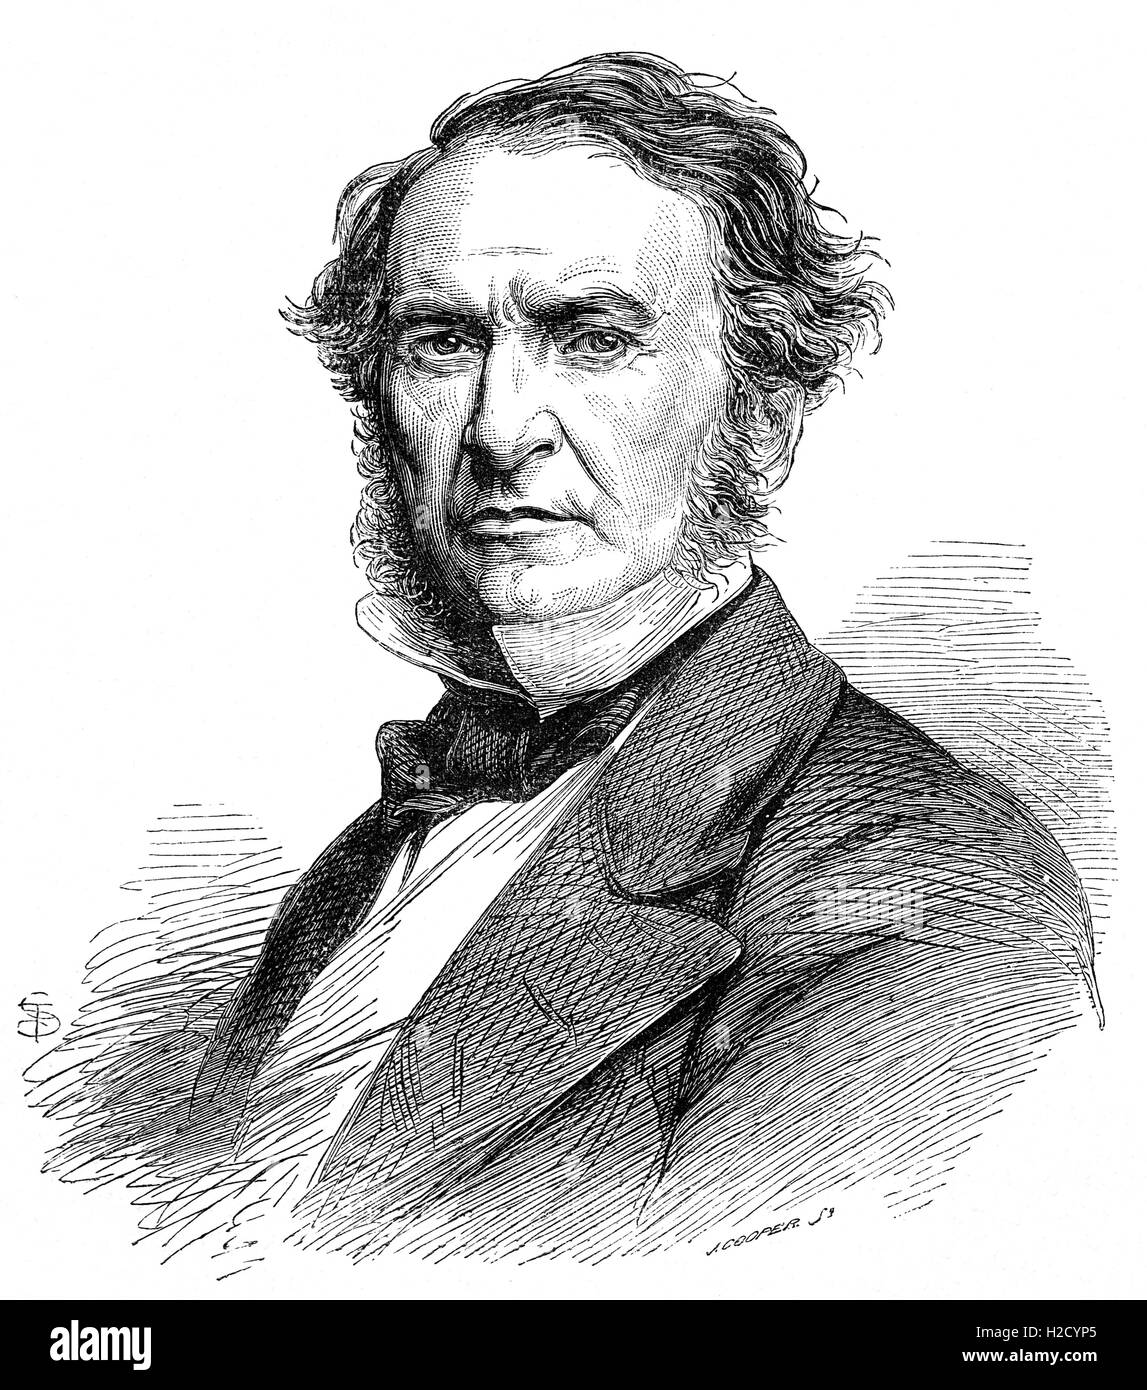 William Ewart Gladstone, (1809 – 1898) was a British Liberal politician. In a career lasting over sixty years, he served as Prime Minister on four separate occasions and served as Chancellor of the Exchequer four times. In May 1864 Gladstone said all mentally able men should  be enfranchised, but admitted that this would only come about once the working classes themselves showed more interest in the subject. Queen Victoria was not pleased with this statement and an outraged Palmerston considered it seditious incitement to agitation. Stock Photo